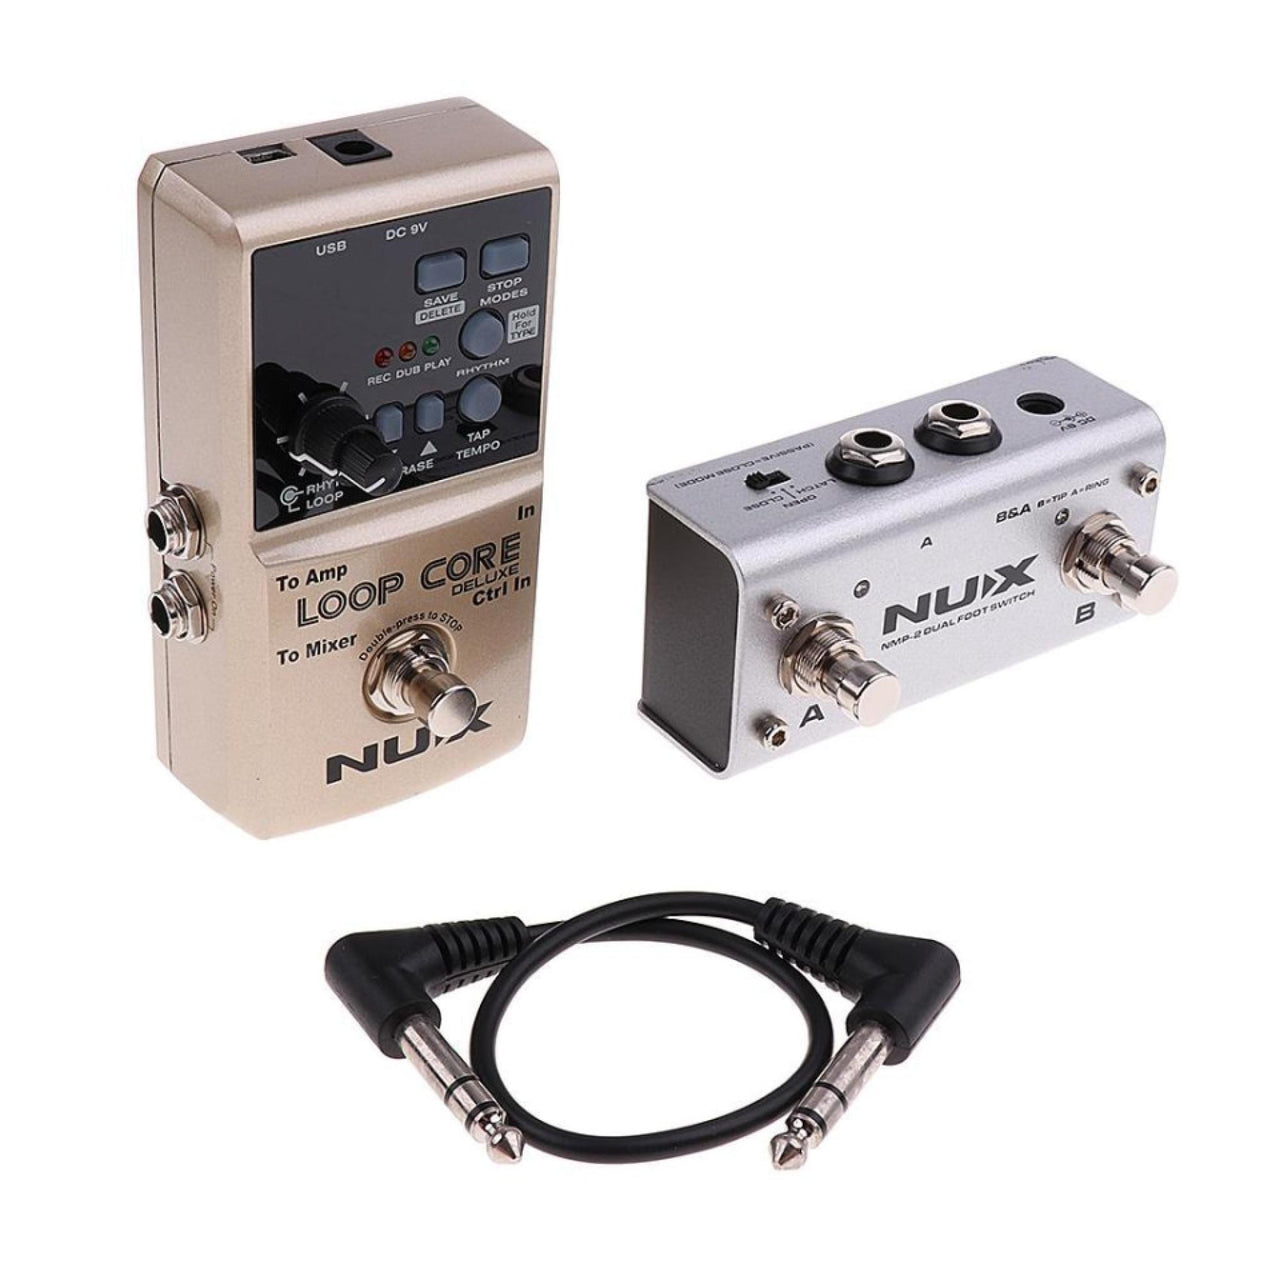 Pedal Nux Loop Core Deluxe + Footswitch, Nuxloopcored